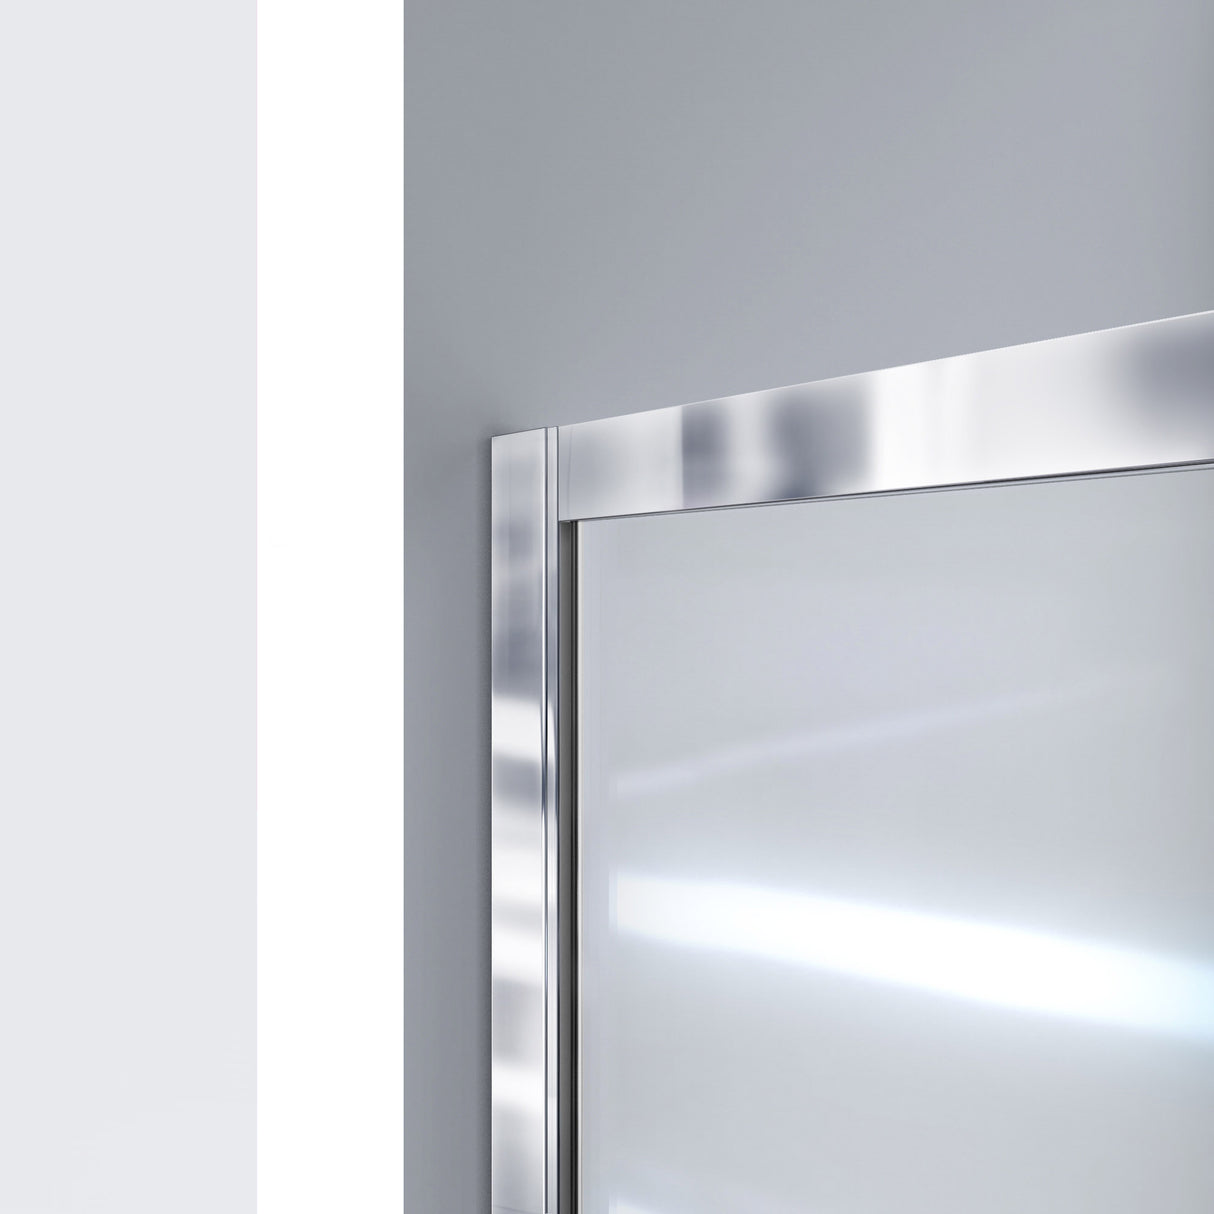 DreamLine Infinity-Z 36 in. D x 48 in. W x 78 3/4 in. H Sliding Shower Door, Base, and White Wall Kit in Brushed Nickel and Clear Glass